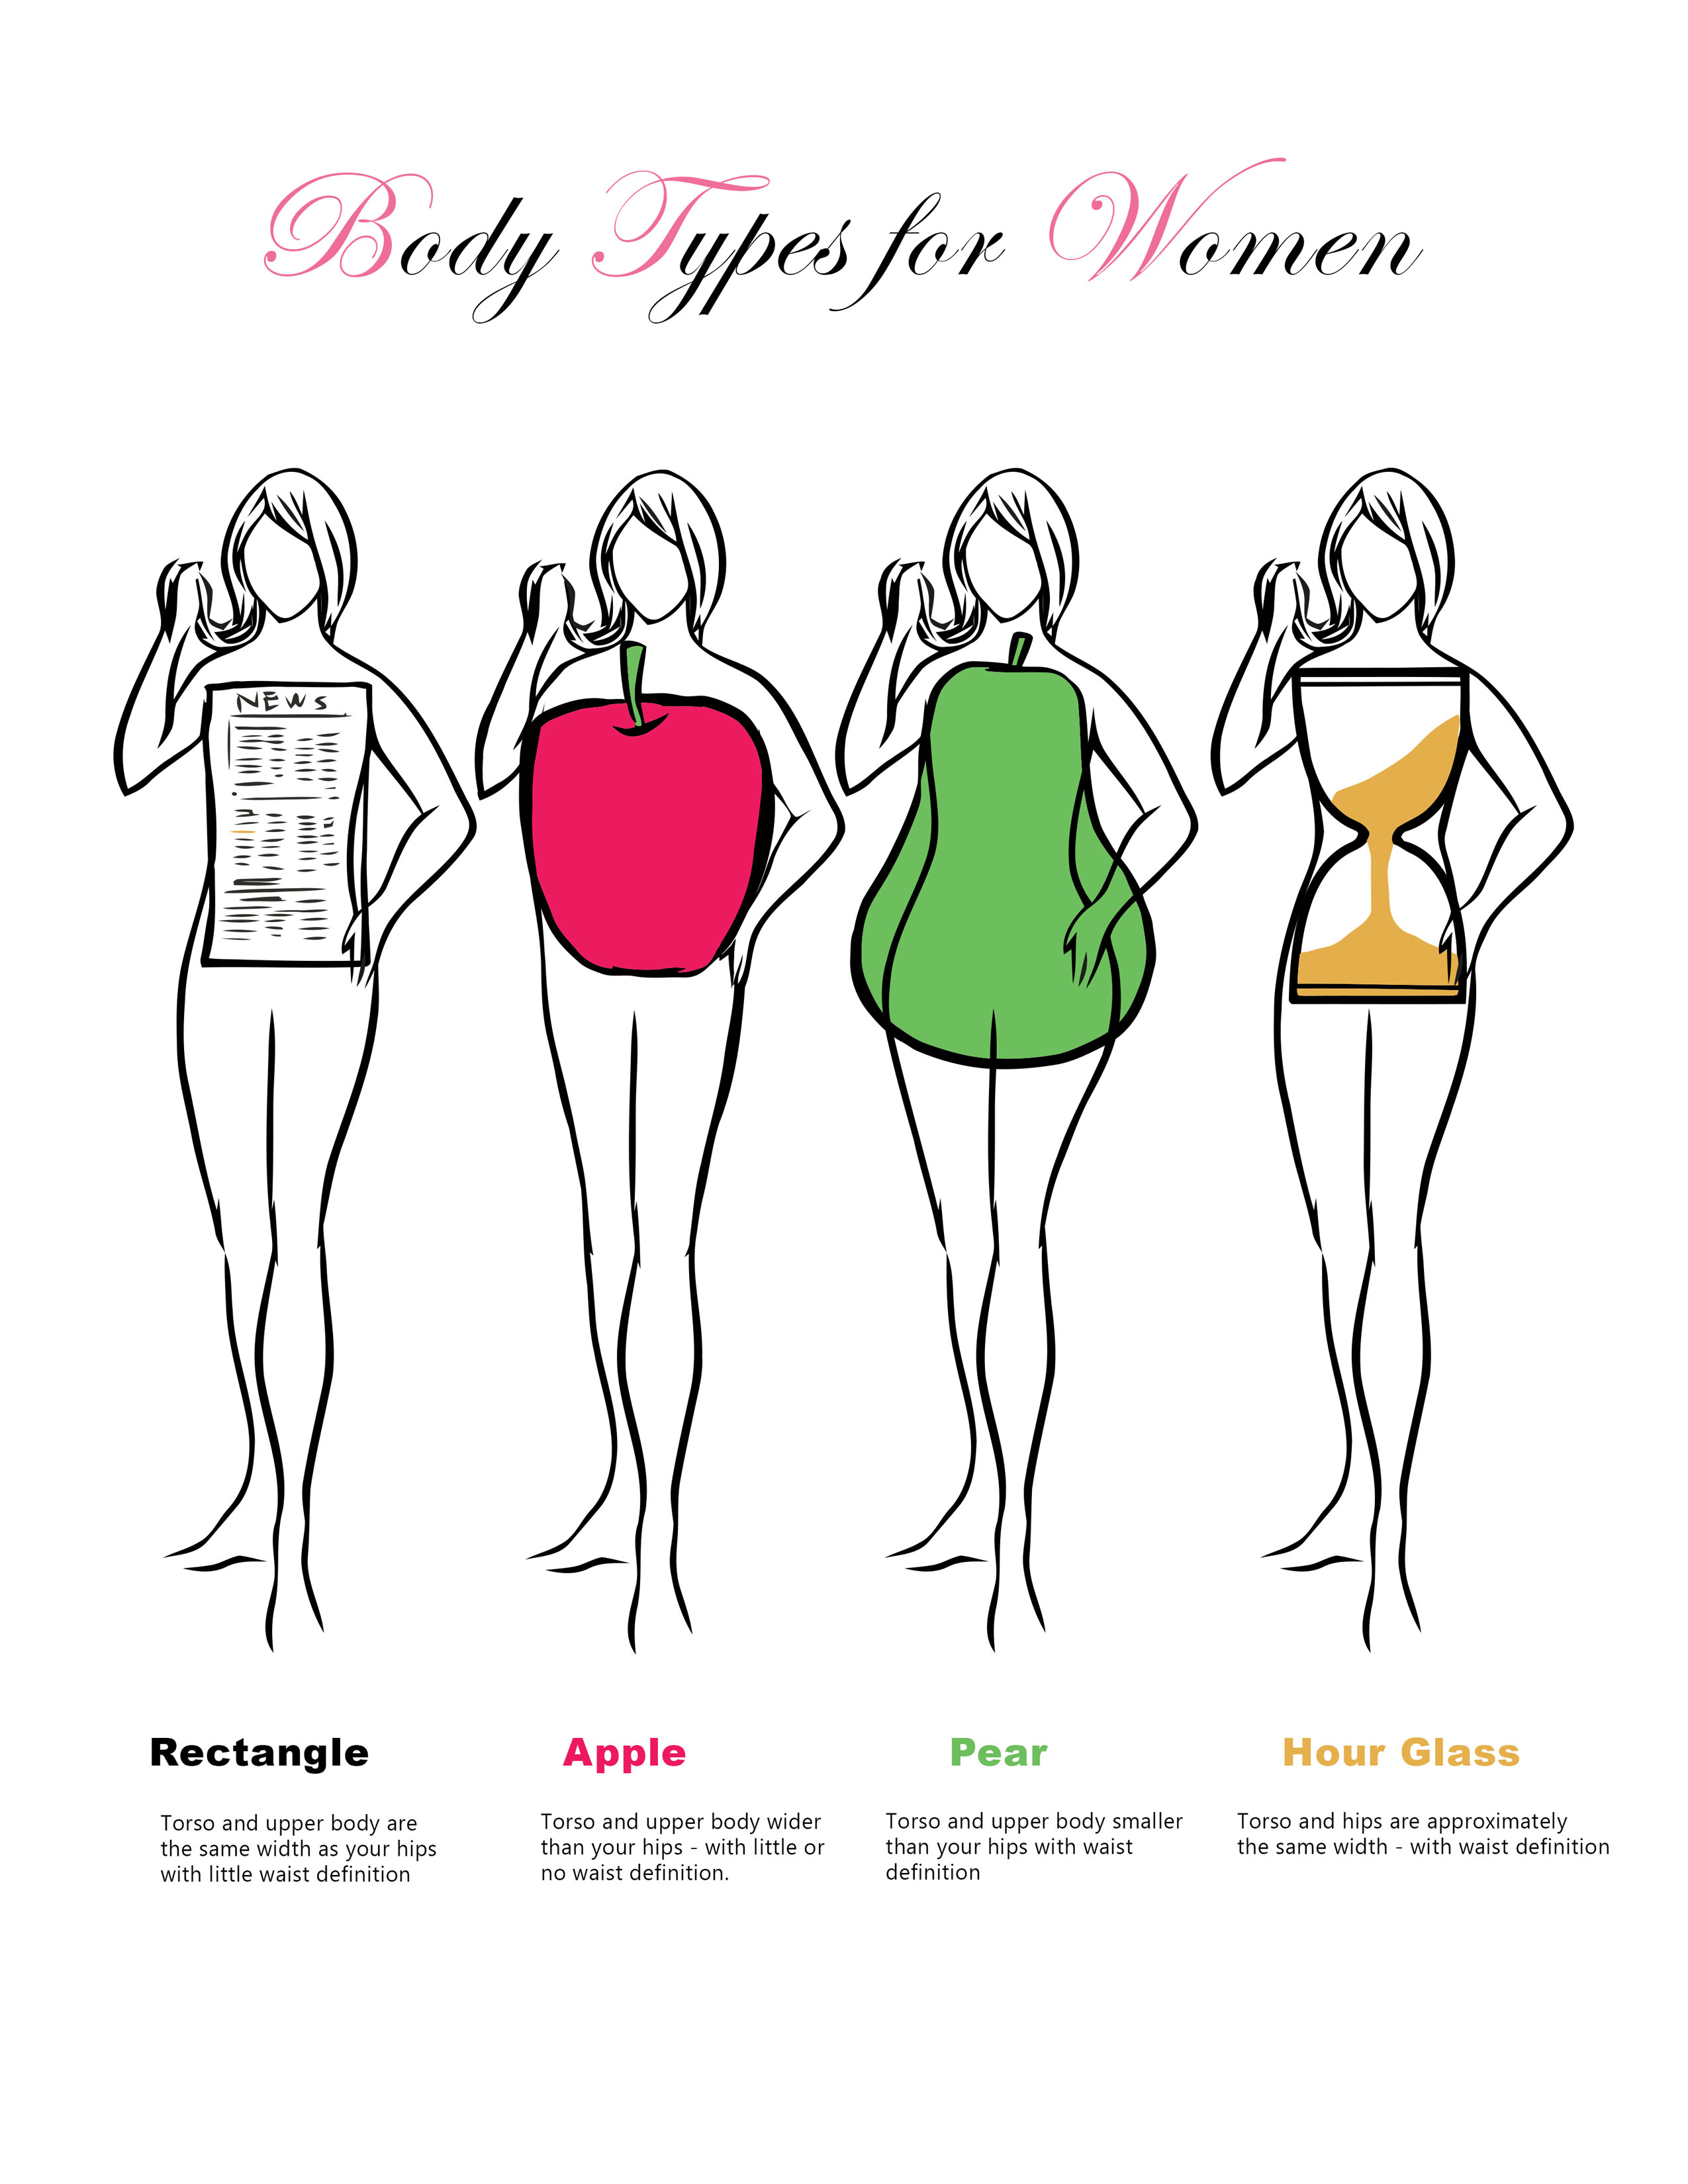 Body types chart for women you can download and print.